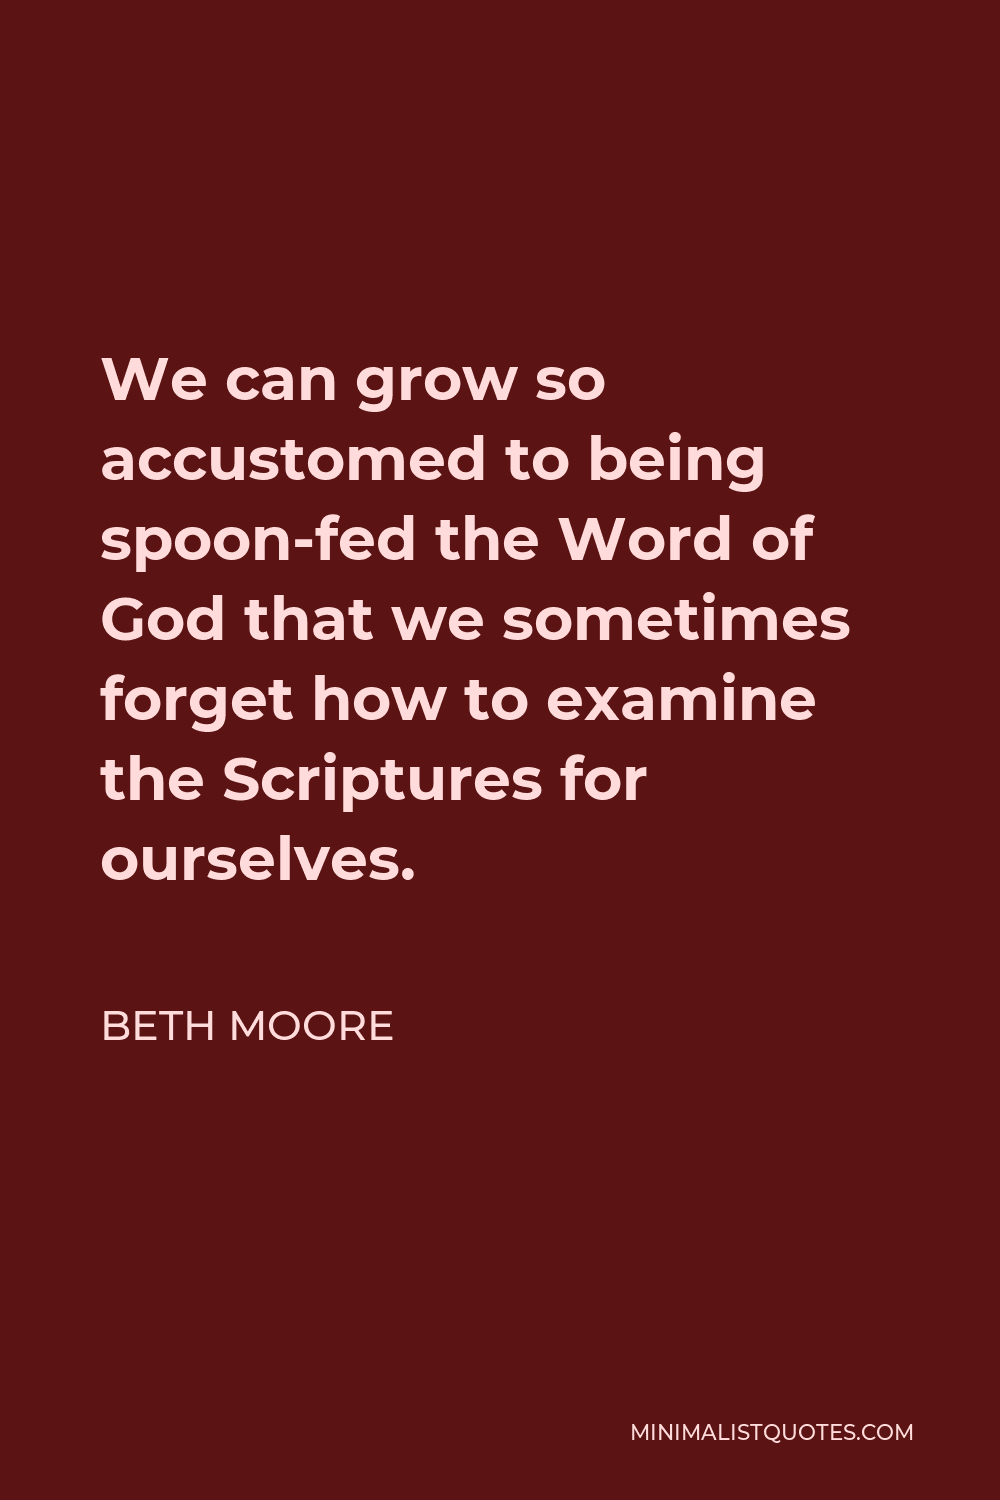 Beth Moore Quote - We can grow so accustomed to being spoon-fed the Word of God that we sometimes forget how to examine the Scriptures for ourselves.